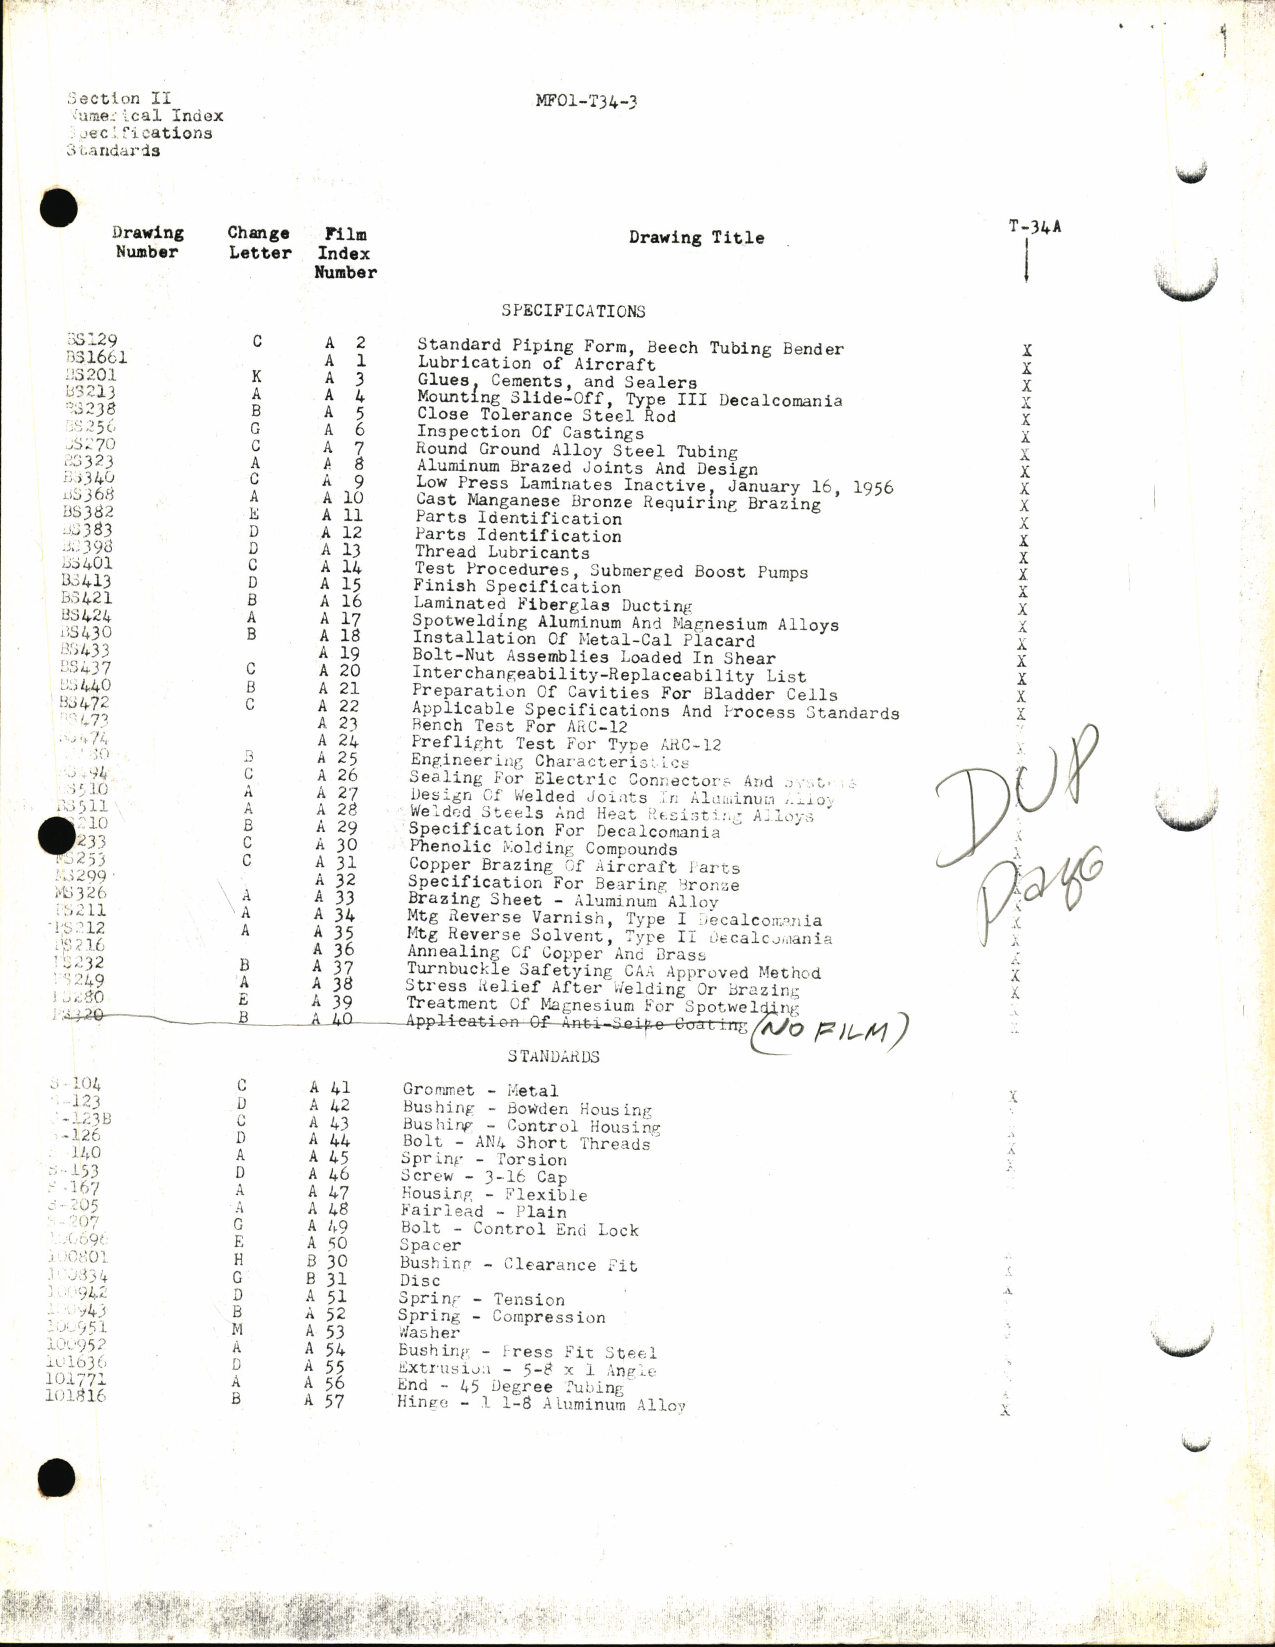 Sample page 7 from AirCorps Library document: Index of Drawings on Microfilm for T-34 Series Aircraft